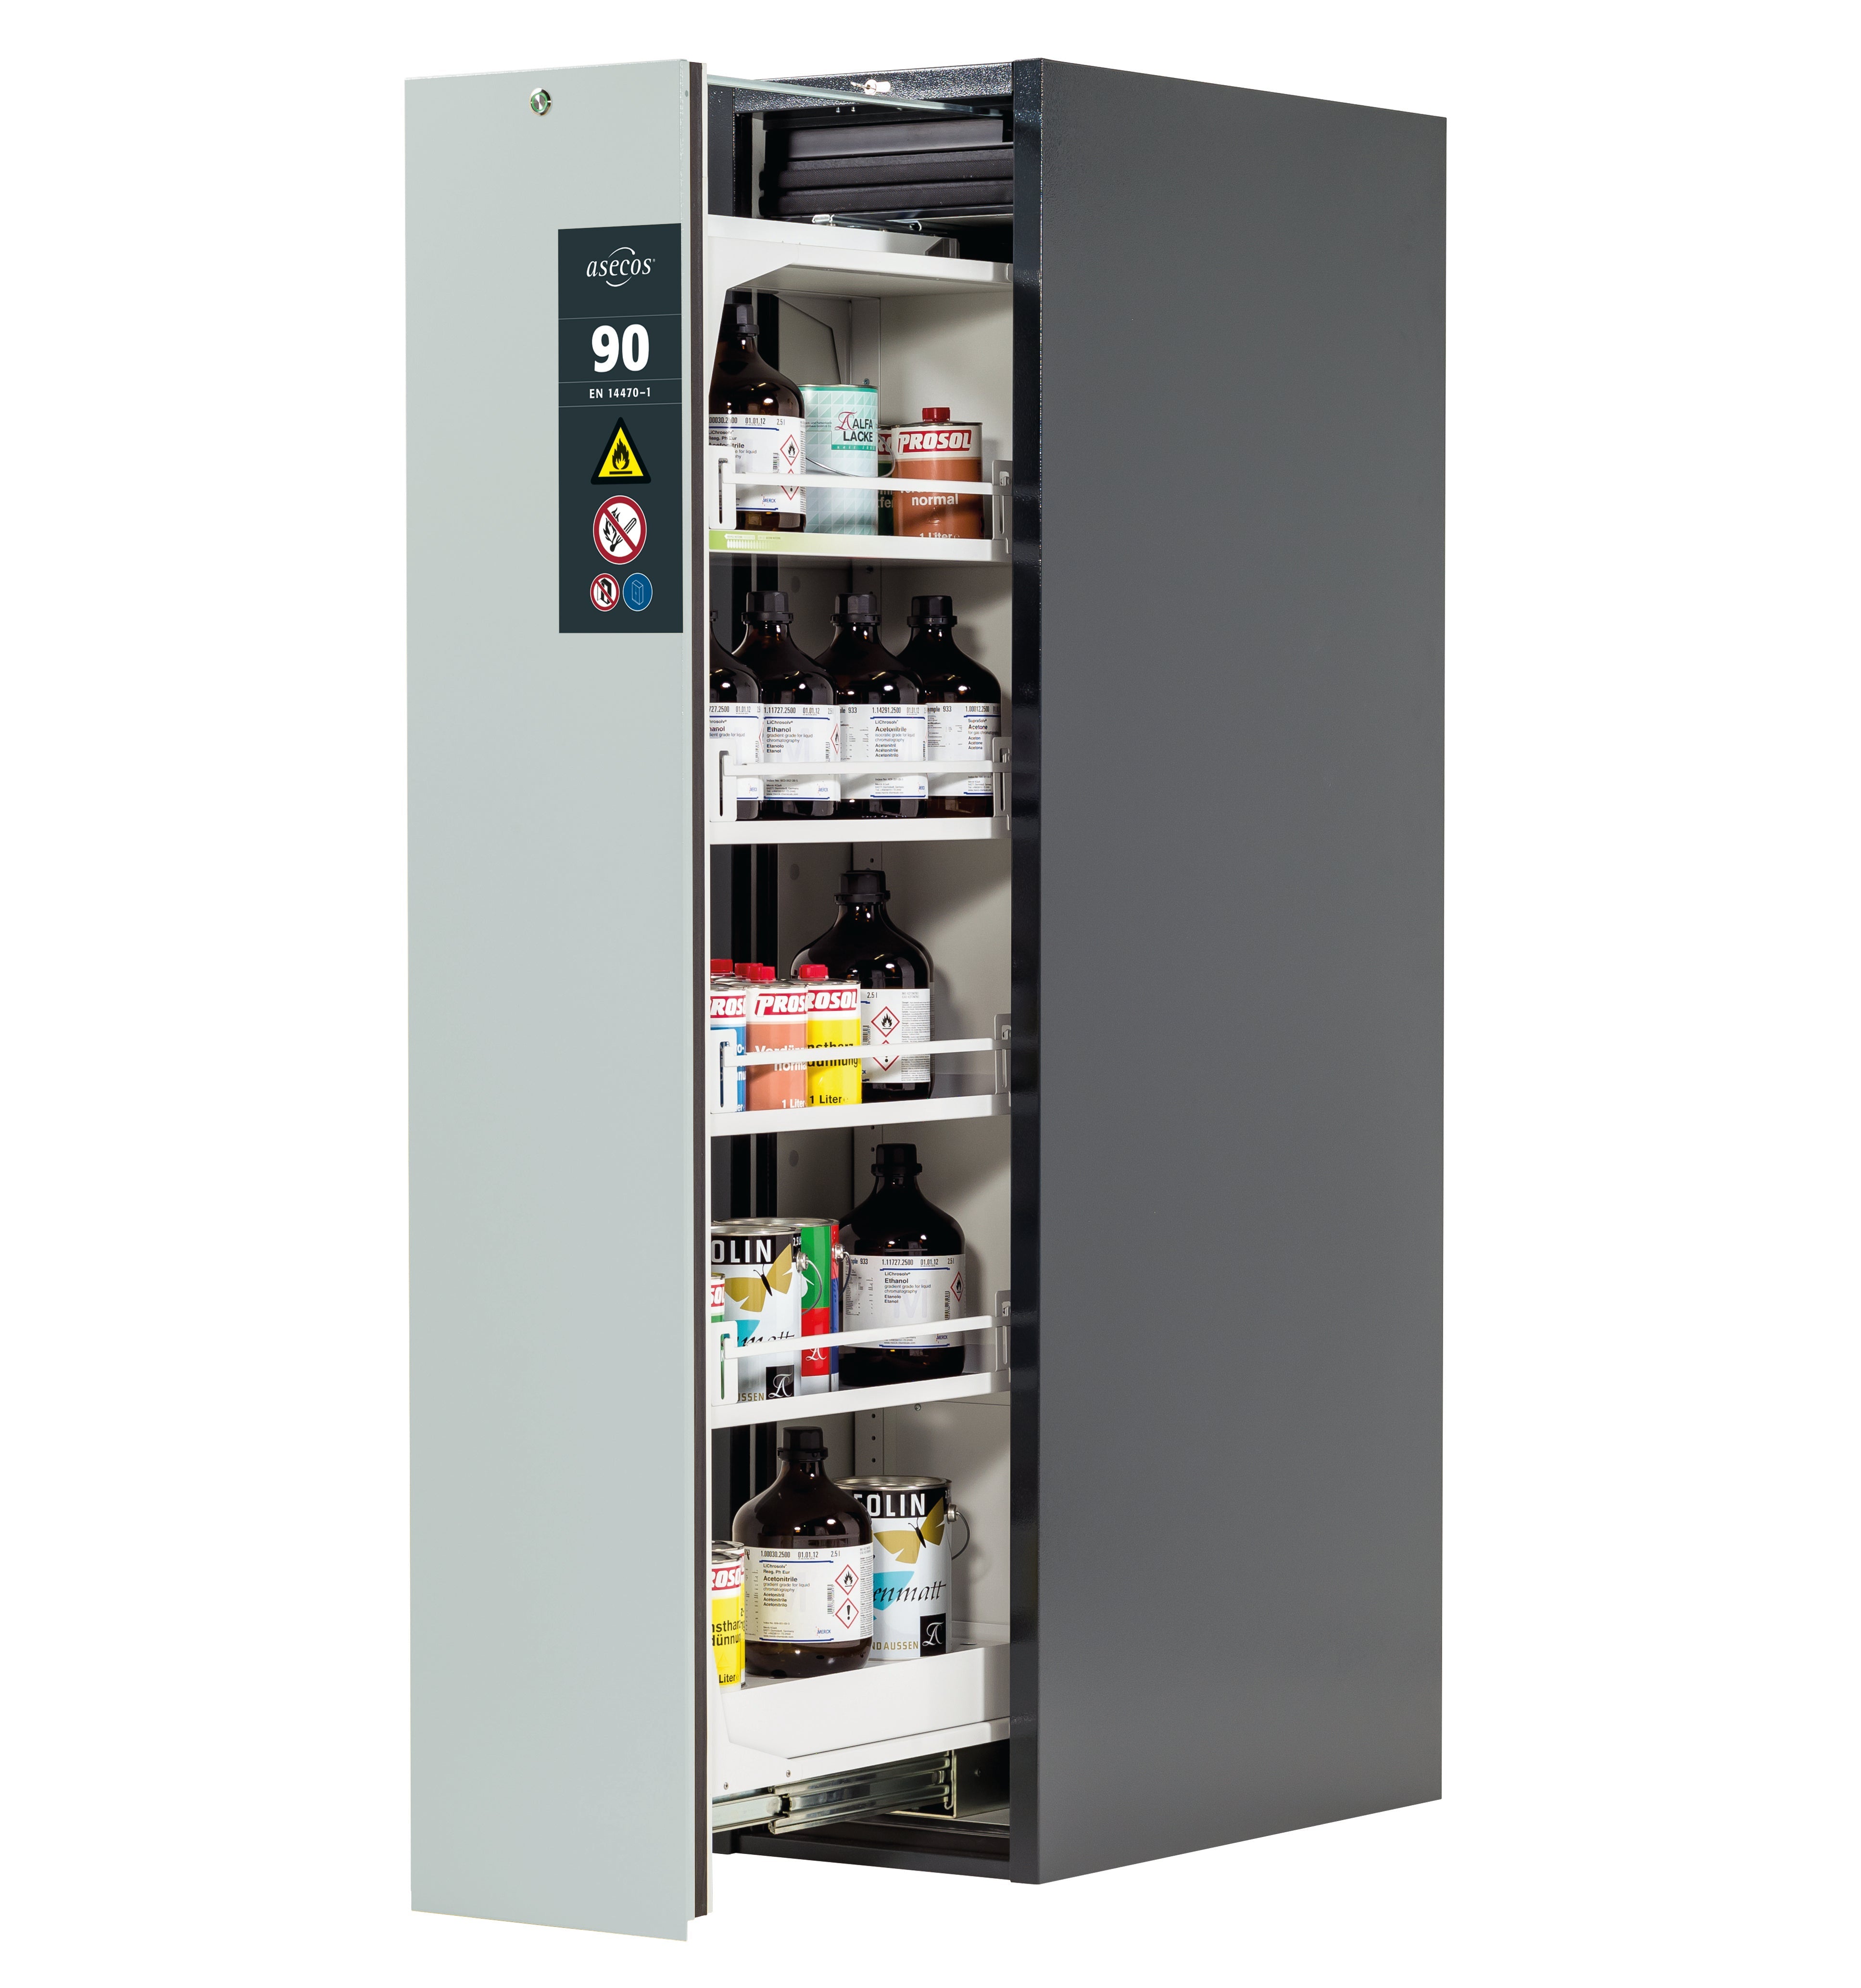 Type 90 safety cabinet V-MOVE-90 model V90.196.045.VDAC:0013 in light gray RAL 7035 with 4x standard shelves (sheet steel)